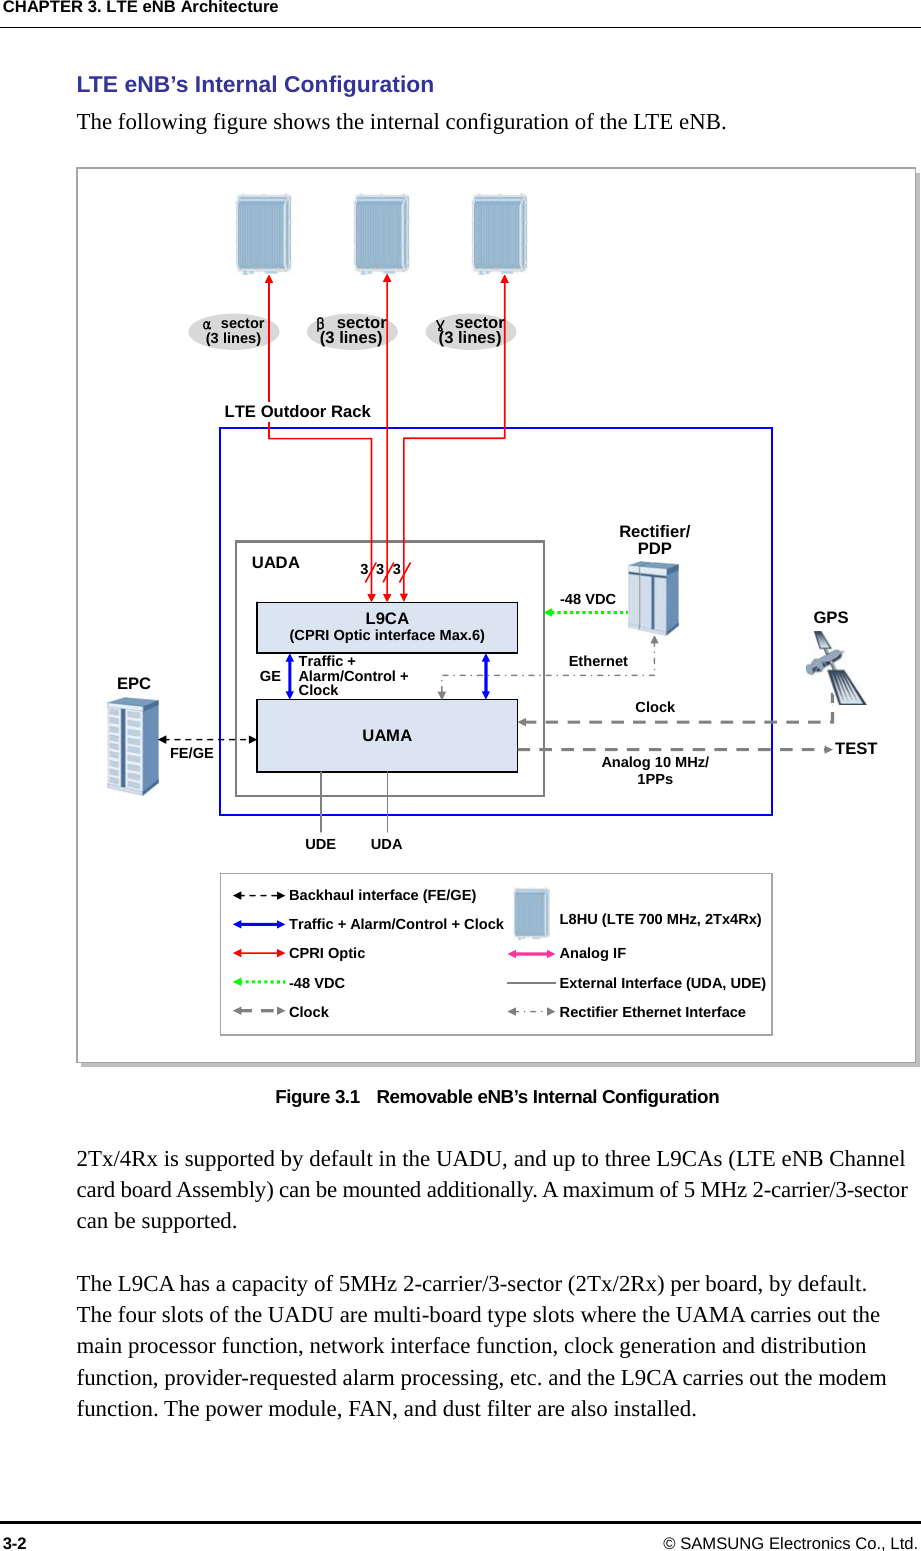 CHAPTER 3. LTE eNB Architecture LTE eNB’s Internal Configuration The following figure shows the internal configuration of the LTE eNB.  UADA UAMA L9CA(CPRI Optic interface Max.6) EPC GPS TEST Analog 10 MHz/1PPs Clock UDE UDA GE  Traffic + Alarm/Control + Clock 333α sector (3 lines) β sector(3 lines)  γsector(3 lines) Rectifier/PDP Ethernet -48 VDC Backhaul interface (FE/GE) FE/GE LTE Outdoor Rack Traffic + Alarm/Control + Clock CPRI Optic -48 VDC Clock  Rectifier Ethernet Interface External Interface (UDA, UDE) Analog IF 8HU (LTE 700 MHz, 2Tx4Rx) L Figure 3.1    Removable eNB’s Internal Configuration  2Tx/4Rx is supported by default in the UADU, and up to three L9CAs (LTE eNB Channel card board Assembly) can be mounted additionally. A maximum of 5 MHz 2-carrier/3-sector can be supported.  The L9CA has a capacity of 5MHz 2-carrier/3-sector (2Tx/2Rx) per board, by default.  The four slots of the UADU are multi-board type slots where the UAMA carries out the main processor function, network interface function, clock generation and distribution function, provider-requested alarm processing, etc. and the L9CA carries out the modem function. The power module, FAN, and dust filter are also installed.    3-2 © SAMSUNG Electronics Co., Ltd. 